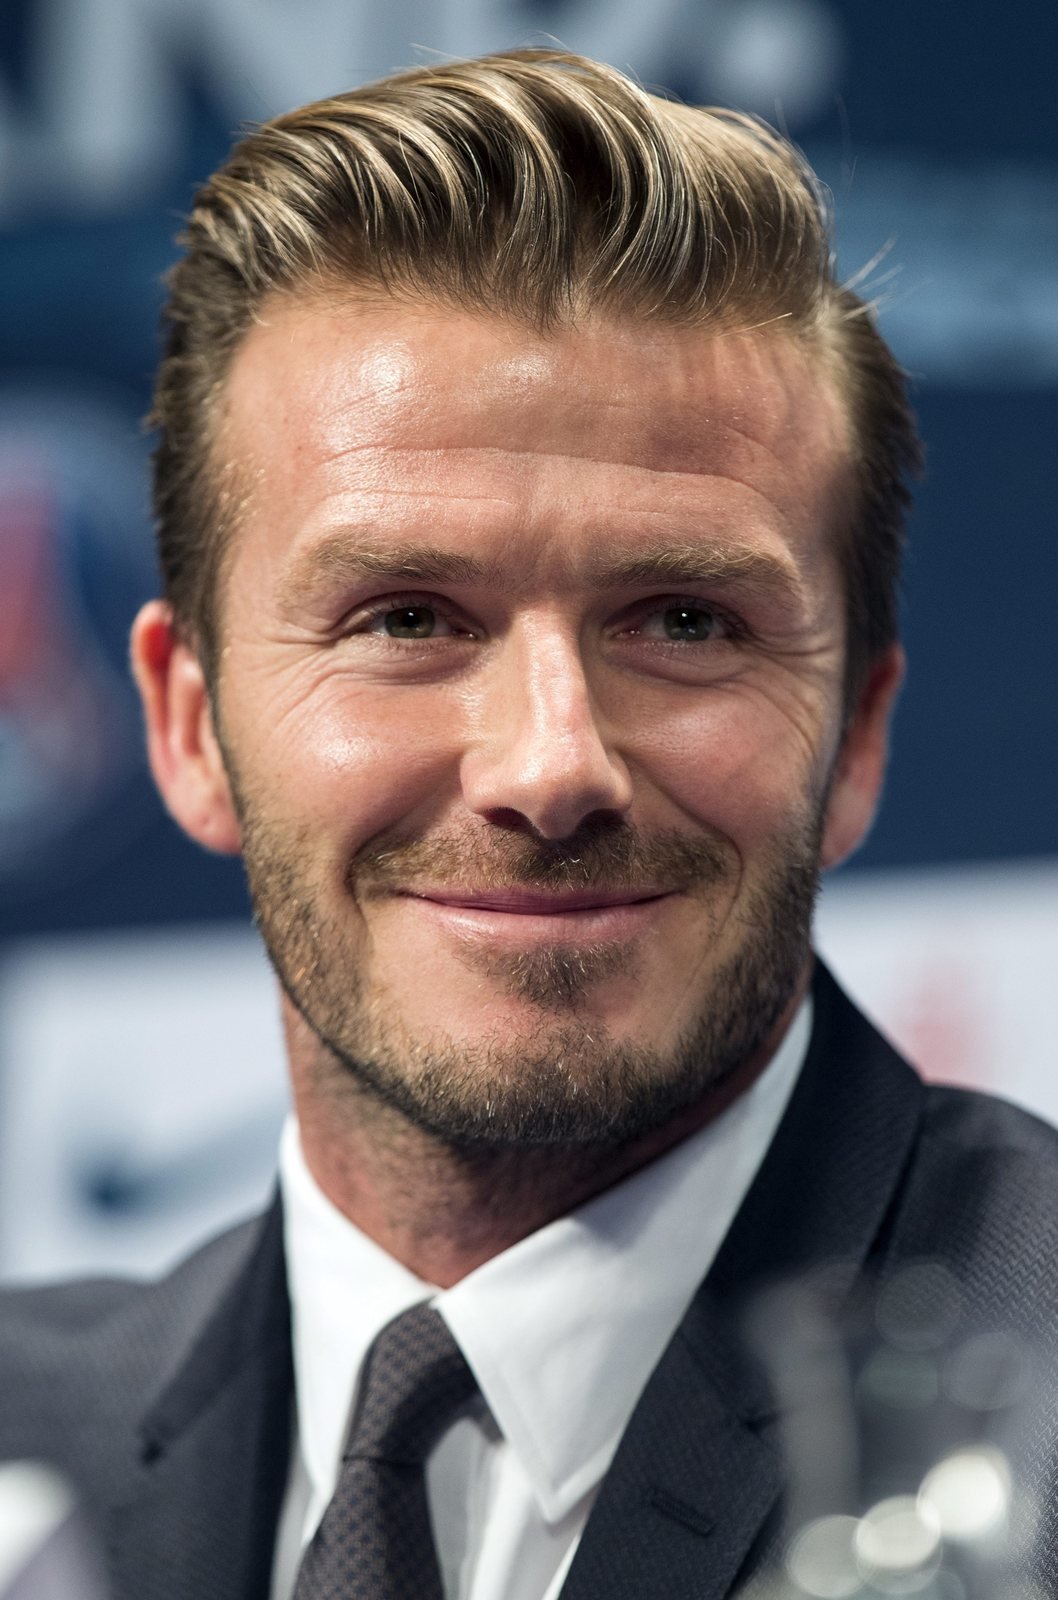 epa03563050 English soccer player David Beckham during a news conference to announce his signing with Paris Saint Germain, at the Parc des Princes stadium in Paris, France, 31 January 2013. Beckham has been without a club since completing a five-year contract at Major League Soccer club Los Angeles Galaxy and was lately keeping fit at England&#39;s Arsenal. He is England&#39;s record capped international with 115 appearances, and his clubs apart from the Galaxy were Manchester United, Real Madrid and AC Milan. PSG, who are under Qatari ownership, have been spending big over the past years, signing the likes of Zlatan Ibrahimov, Thiago Silva and Javier Pastore. They are joint Ligue 1 leaders with Olympique Lyon and reportedly already after Beckham last year.  EPA/IAN LANGSDON